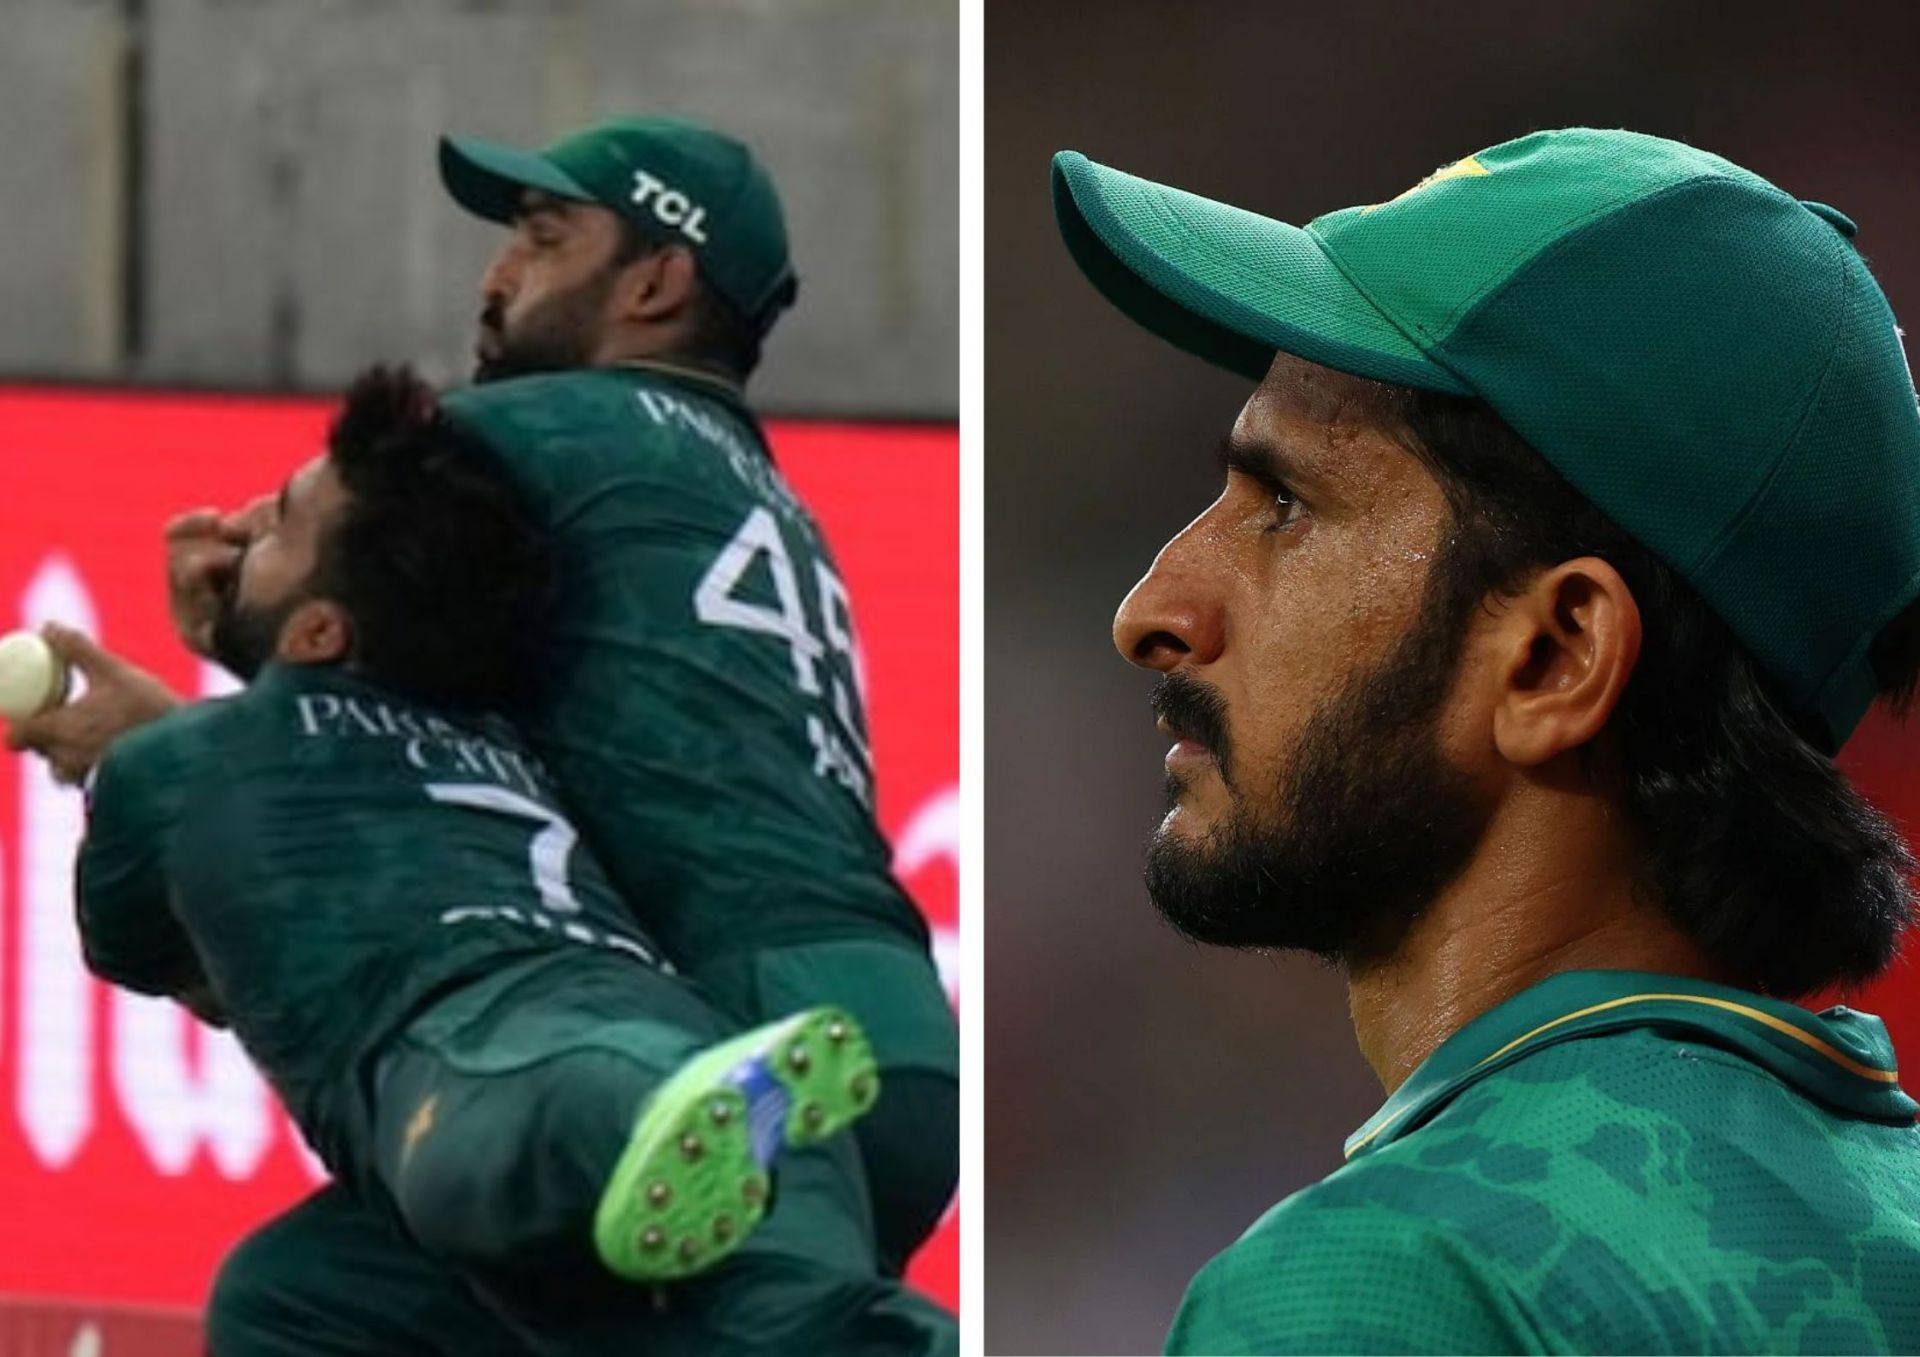 Shadab Khan was involved in a nasty collision on Sunday and has received support from Hasan Ali (Picture Credits: AP via News 18; Getty Images)